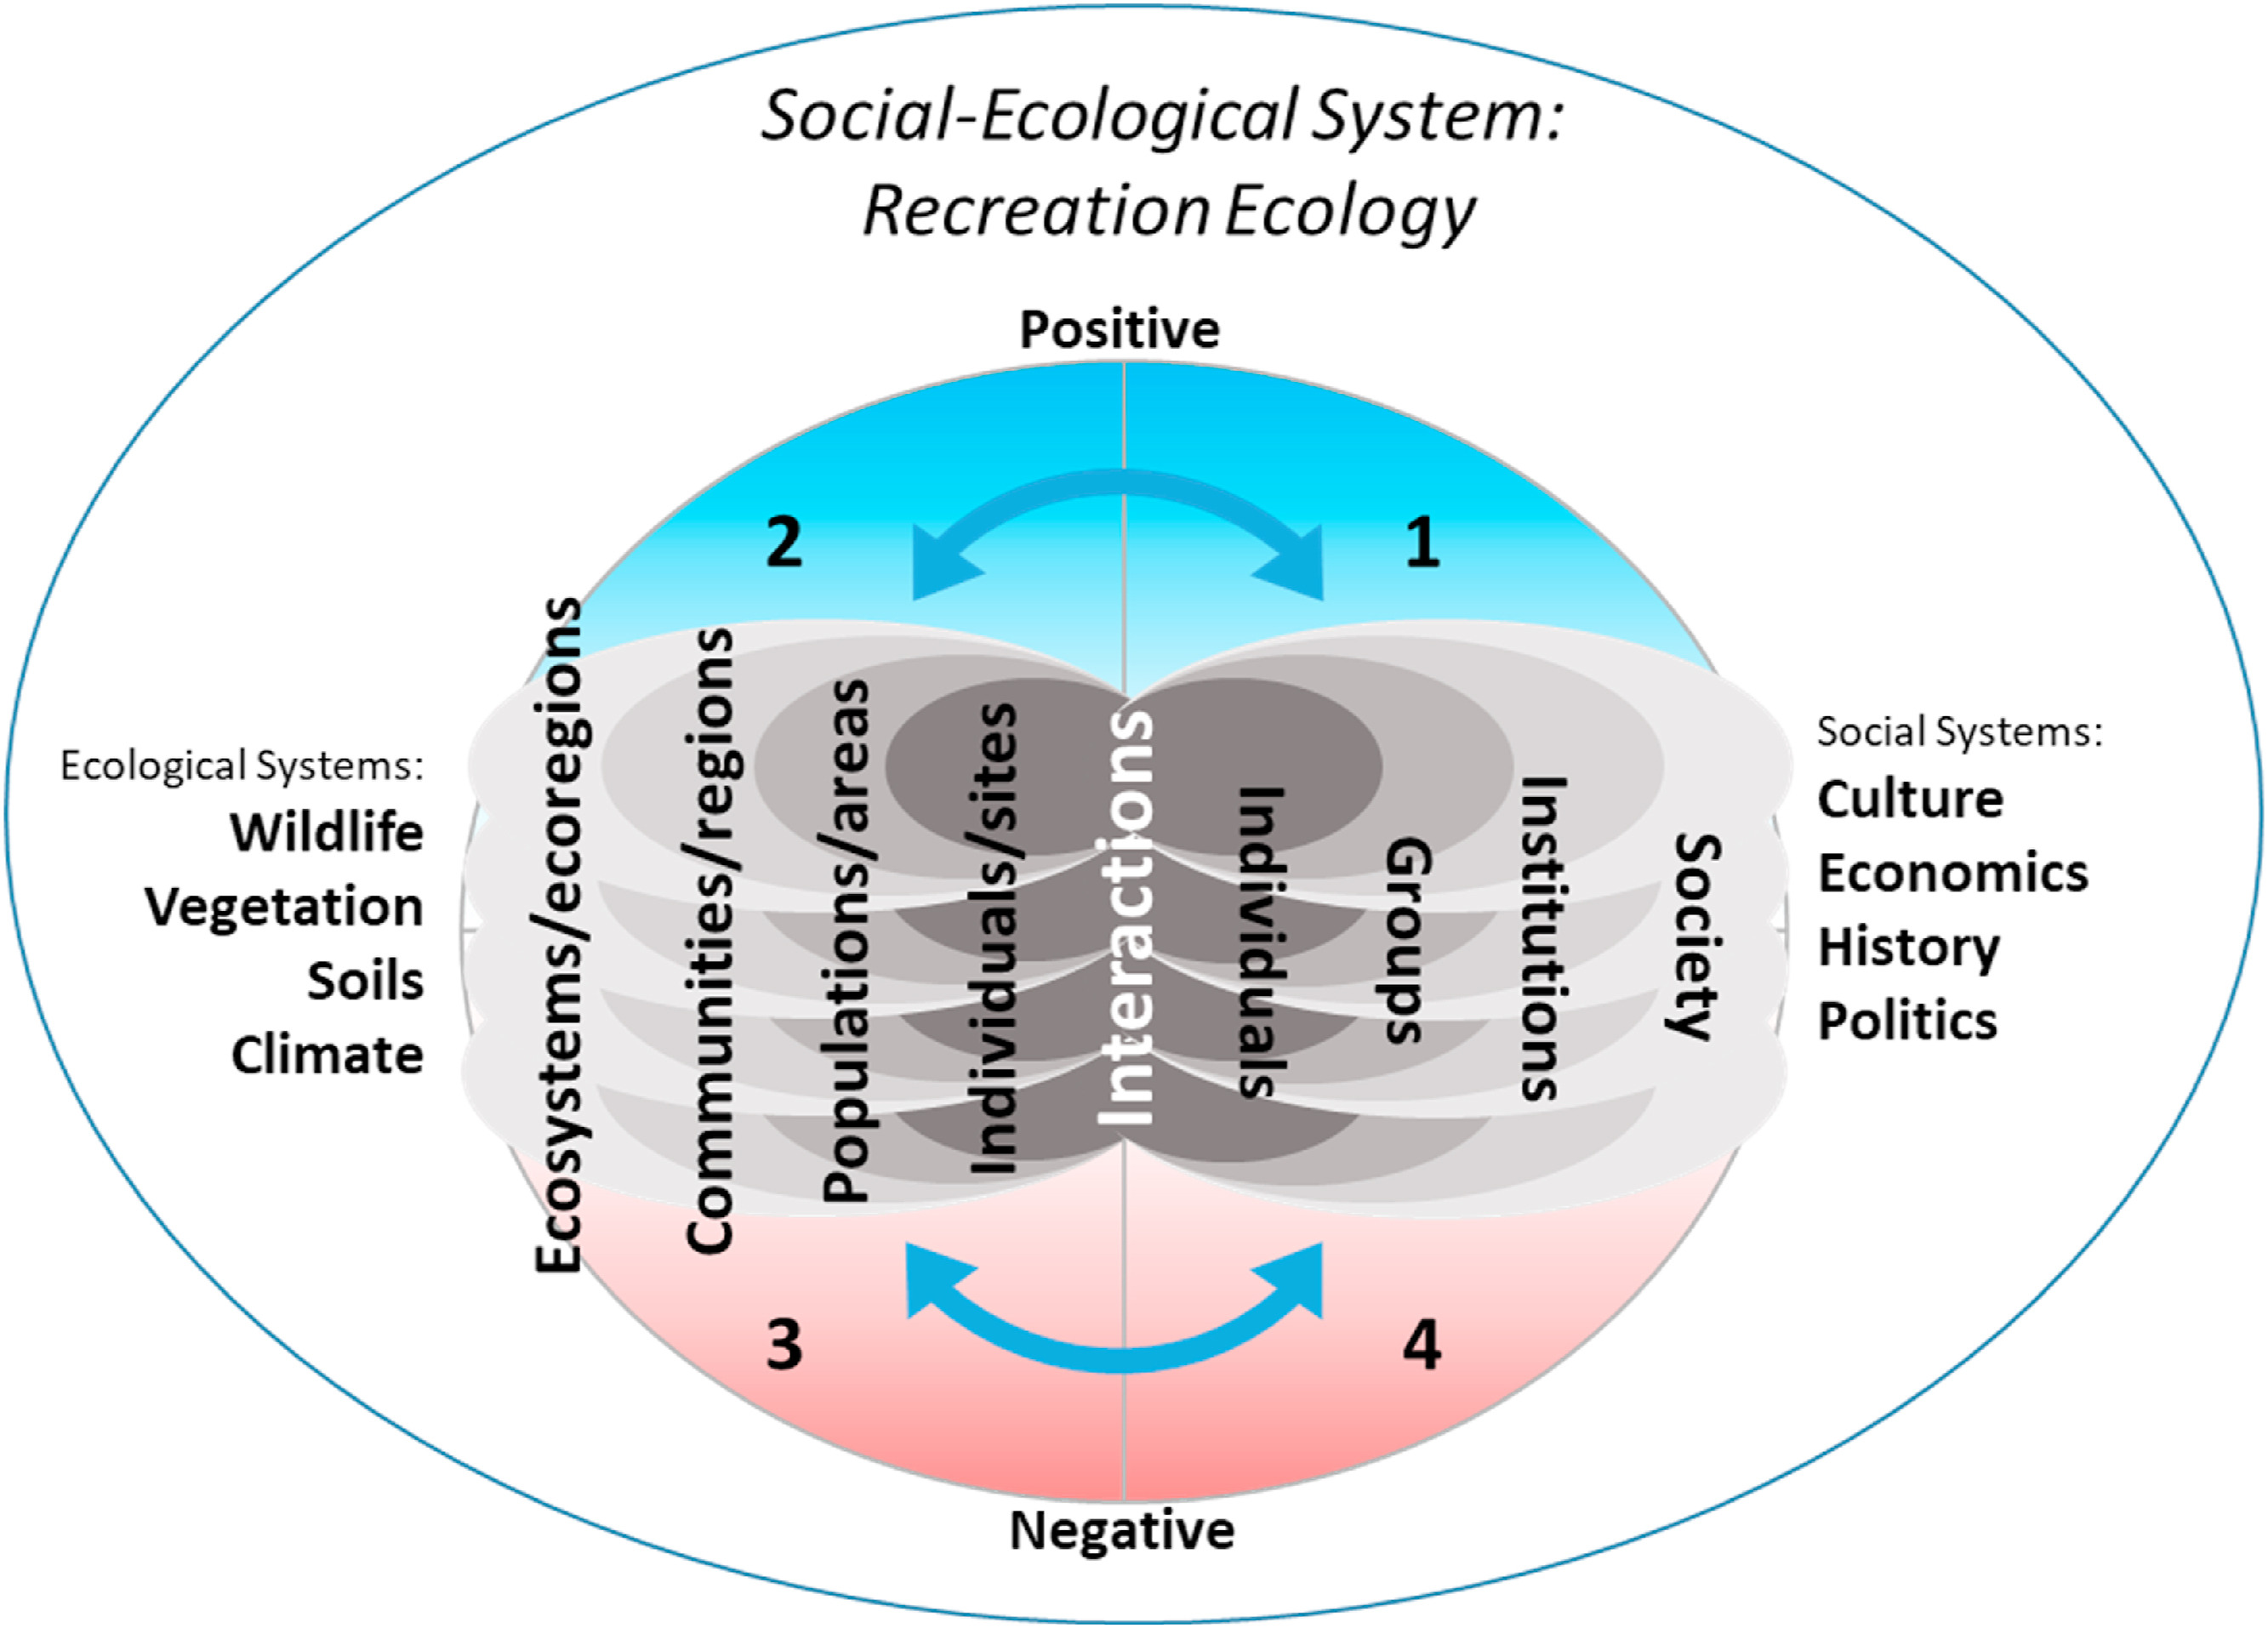 Social-ecological system for recreation ecology